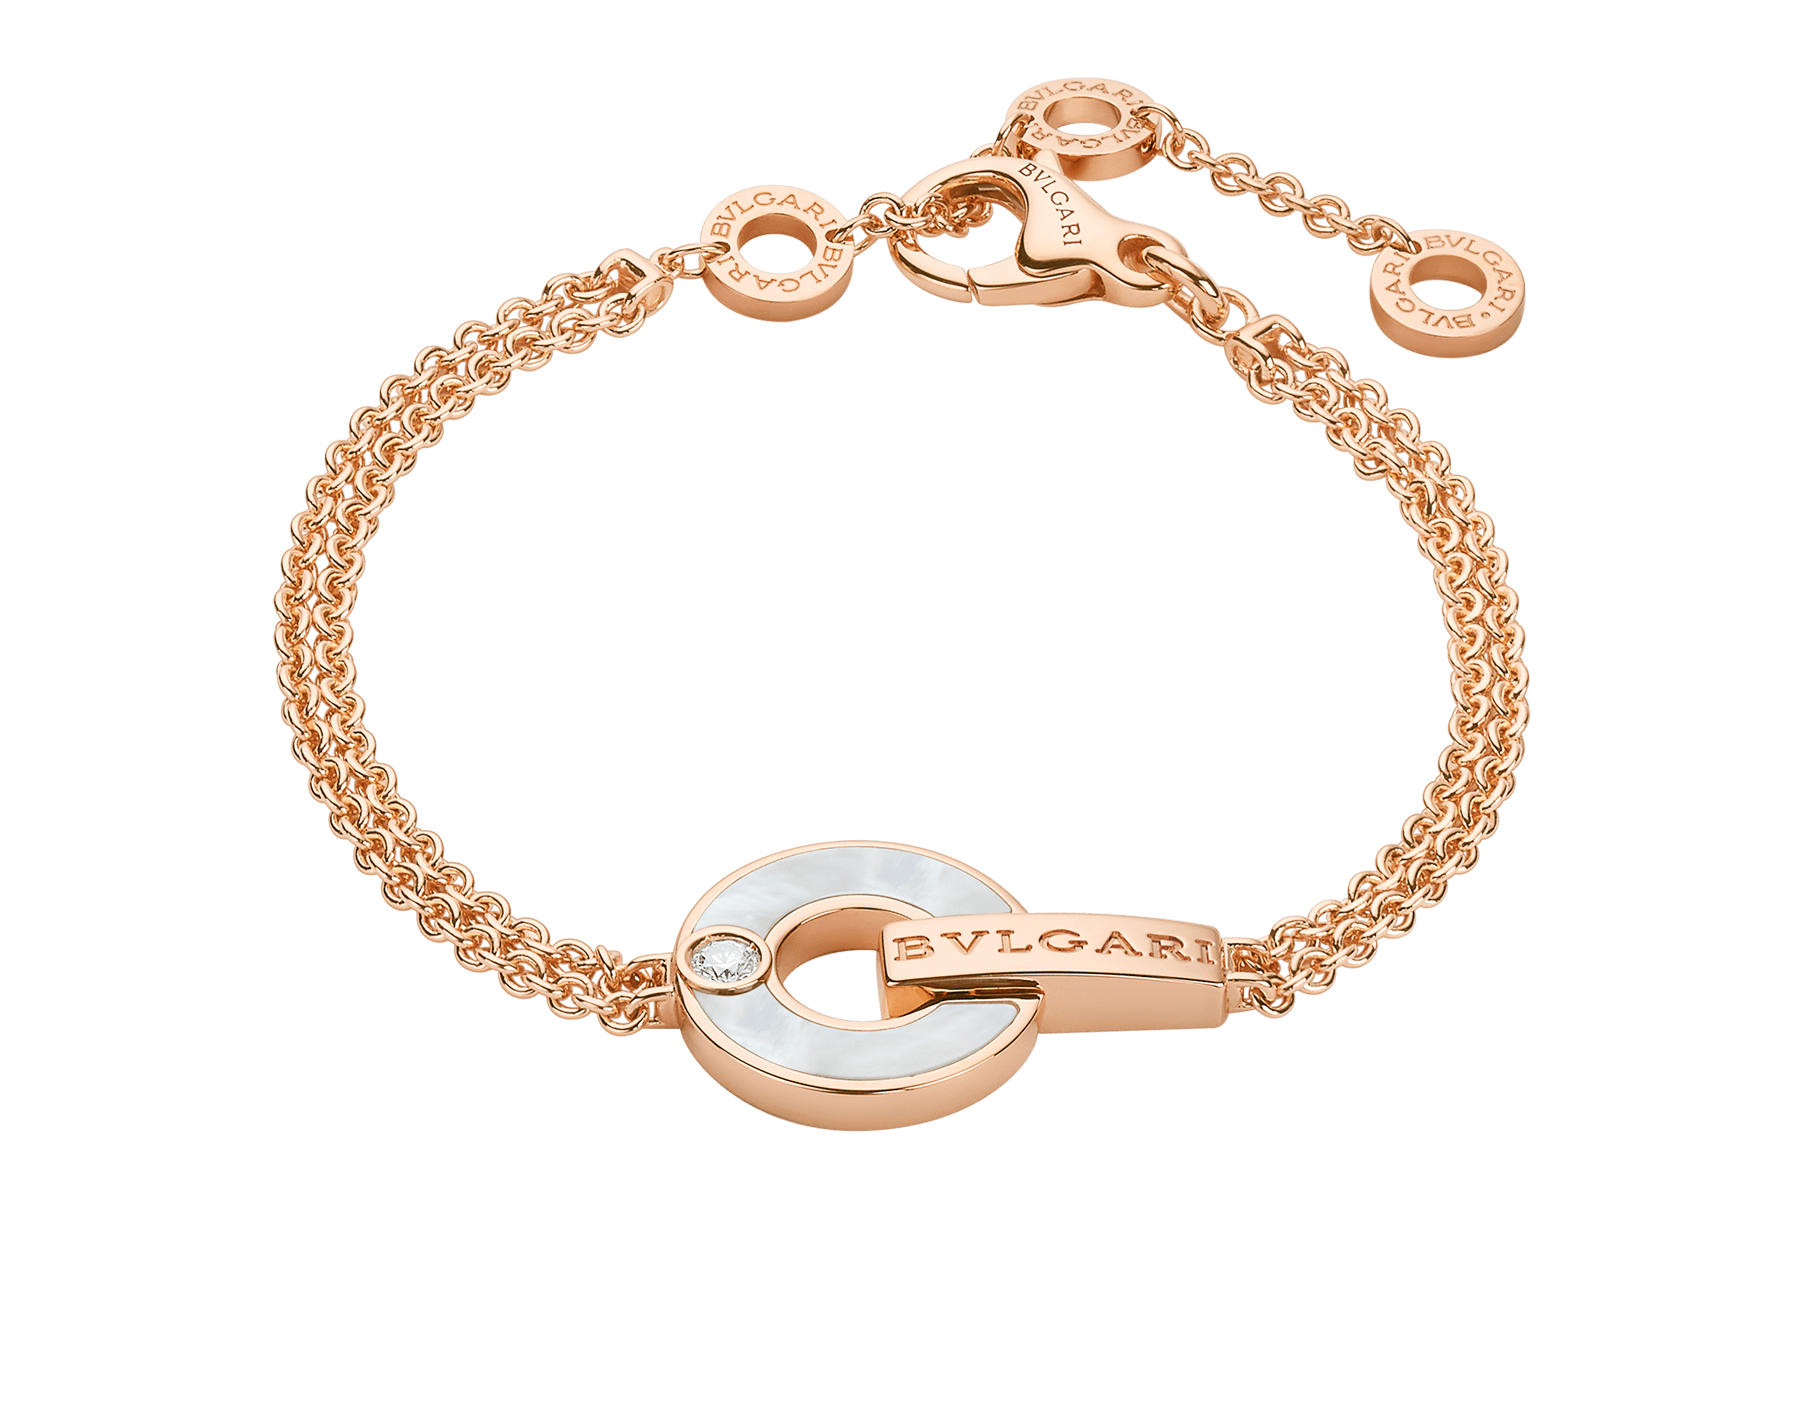 BVLGARI BVLGARI Openwork 18 kt rose gold bracelet set with mother-of-pearl elements and a round brilliant-cut diamond BR858786 image 1